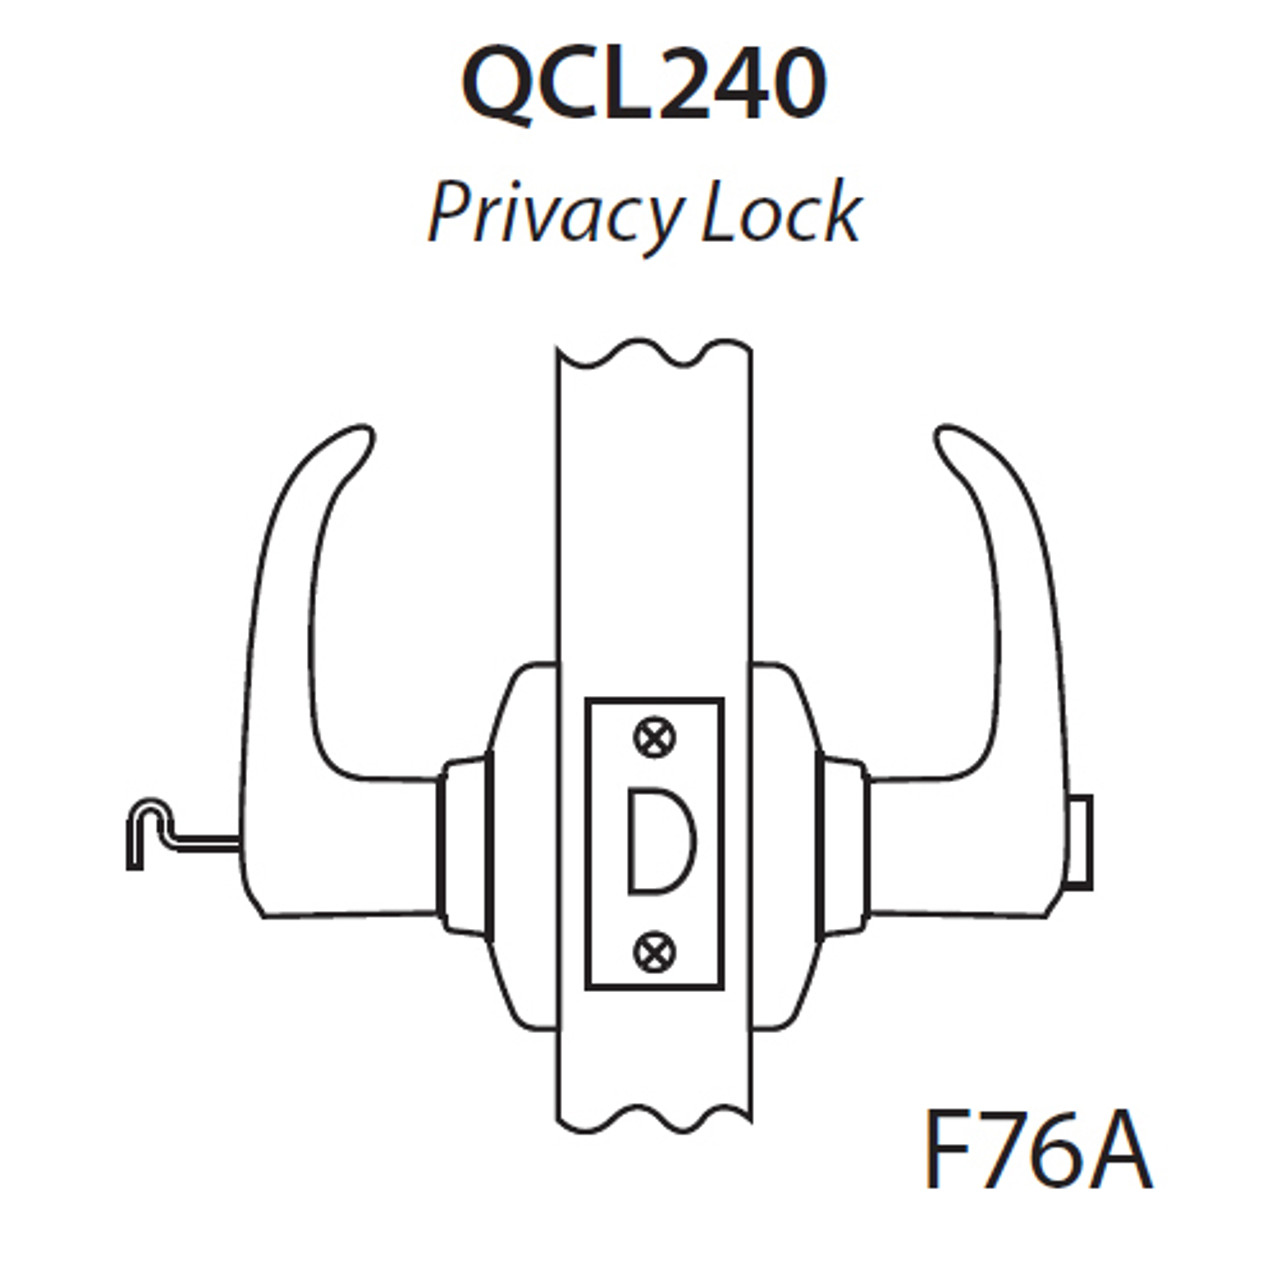 QCL240M613NOLNOS Stanley QCL200 Series Cylindrical Privacy Lock with Summit Lever in Oil Rubbed Bronze